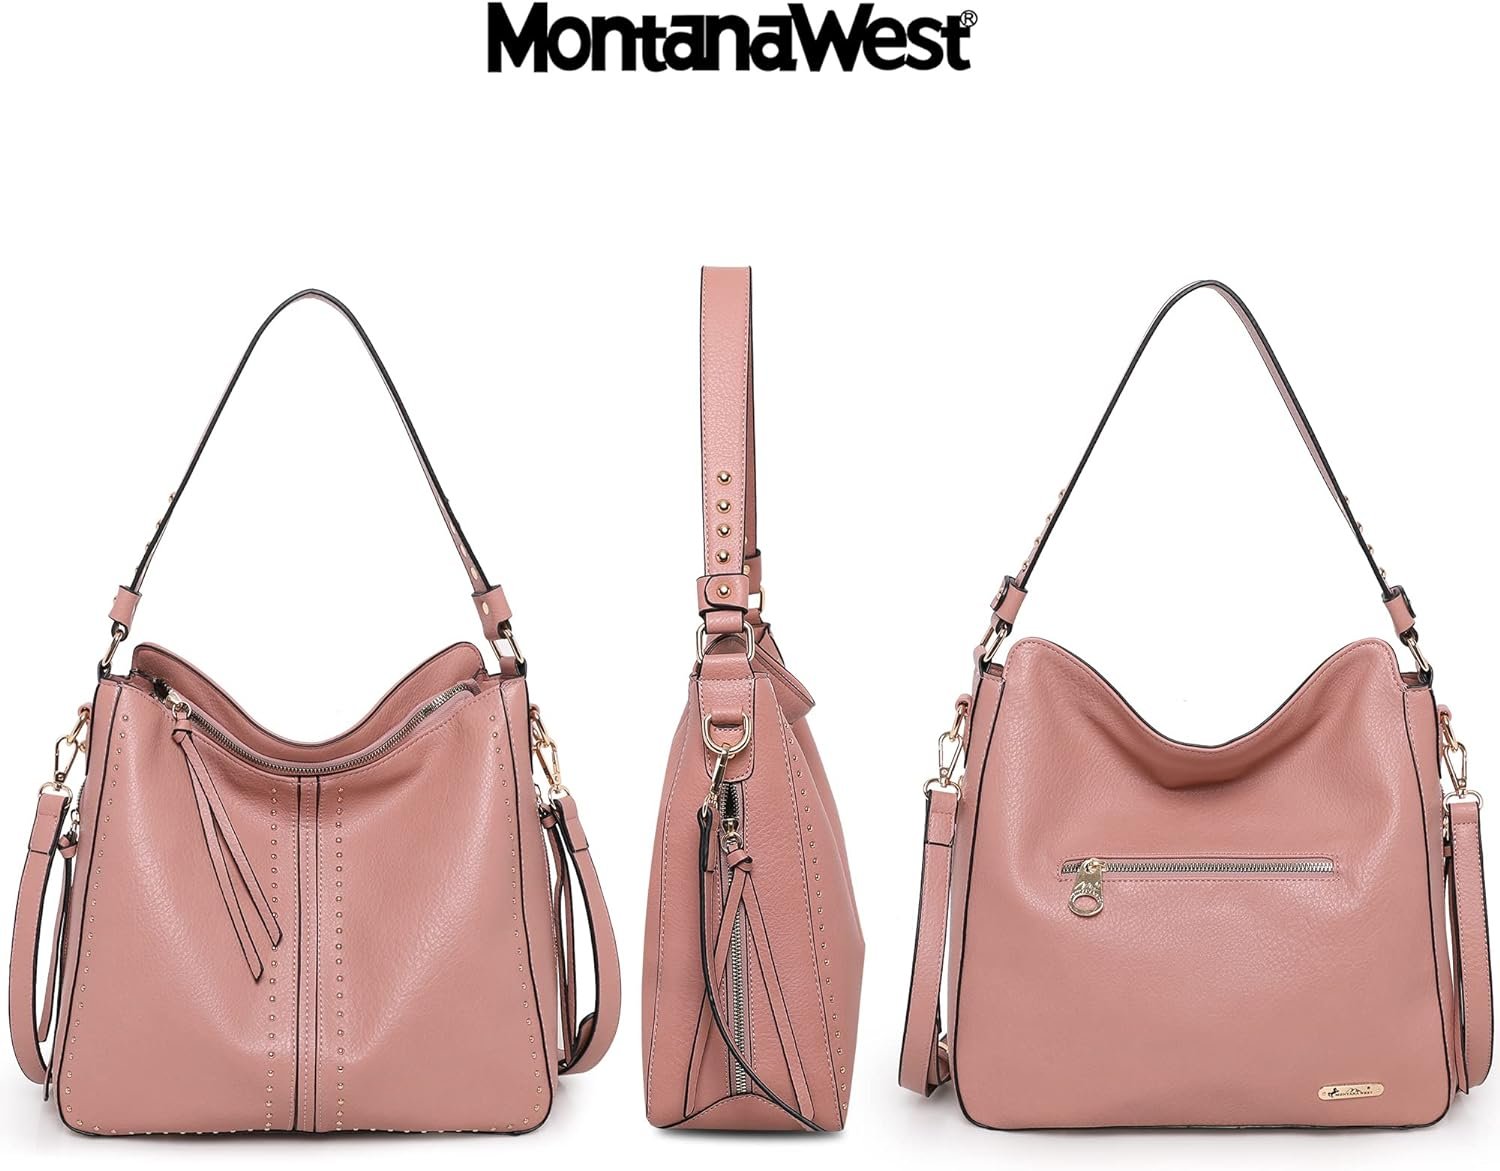 Montana West Hobo Bag for Women Large Conceal Carry Purse and Handbag Crossbody Shoulder Bag with Holster